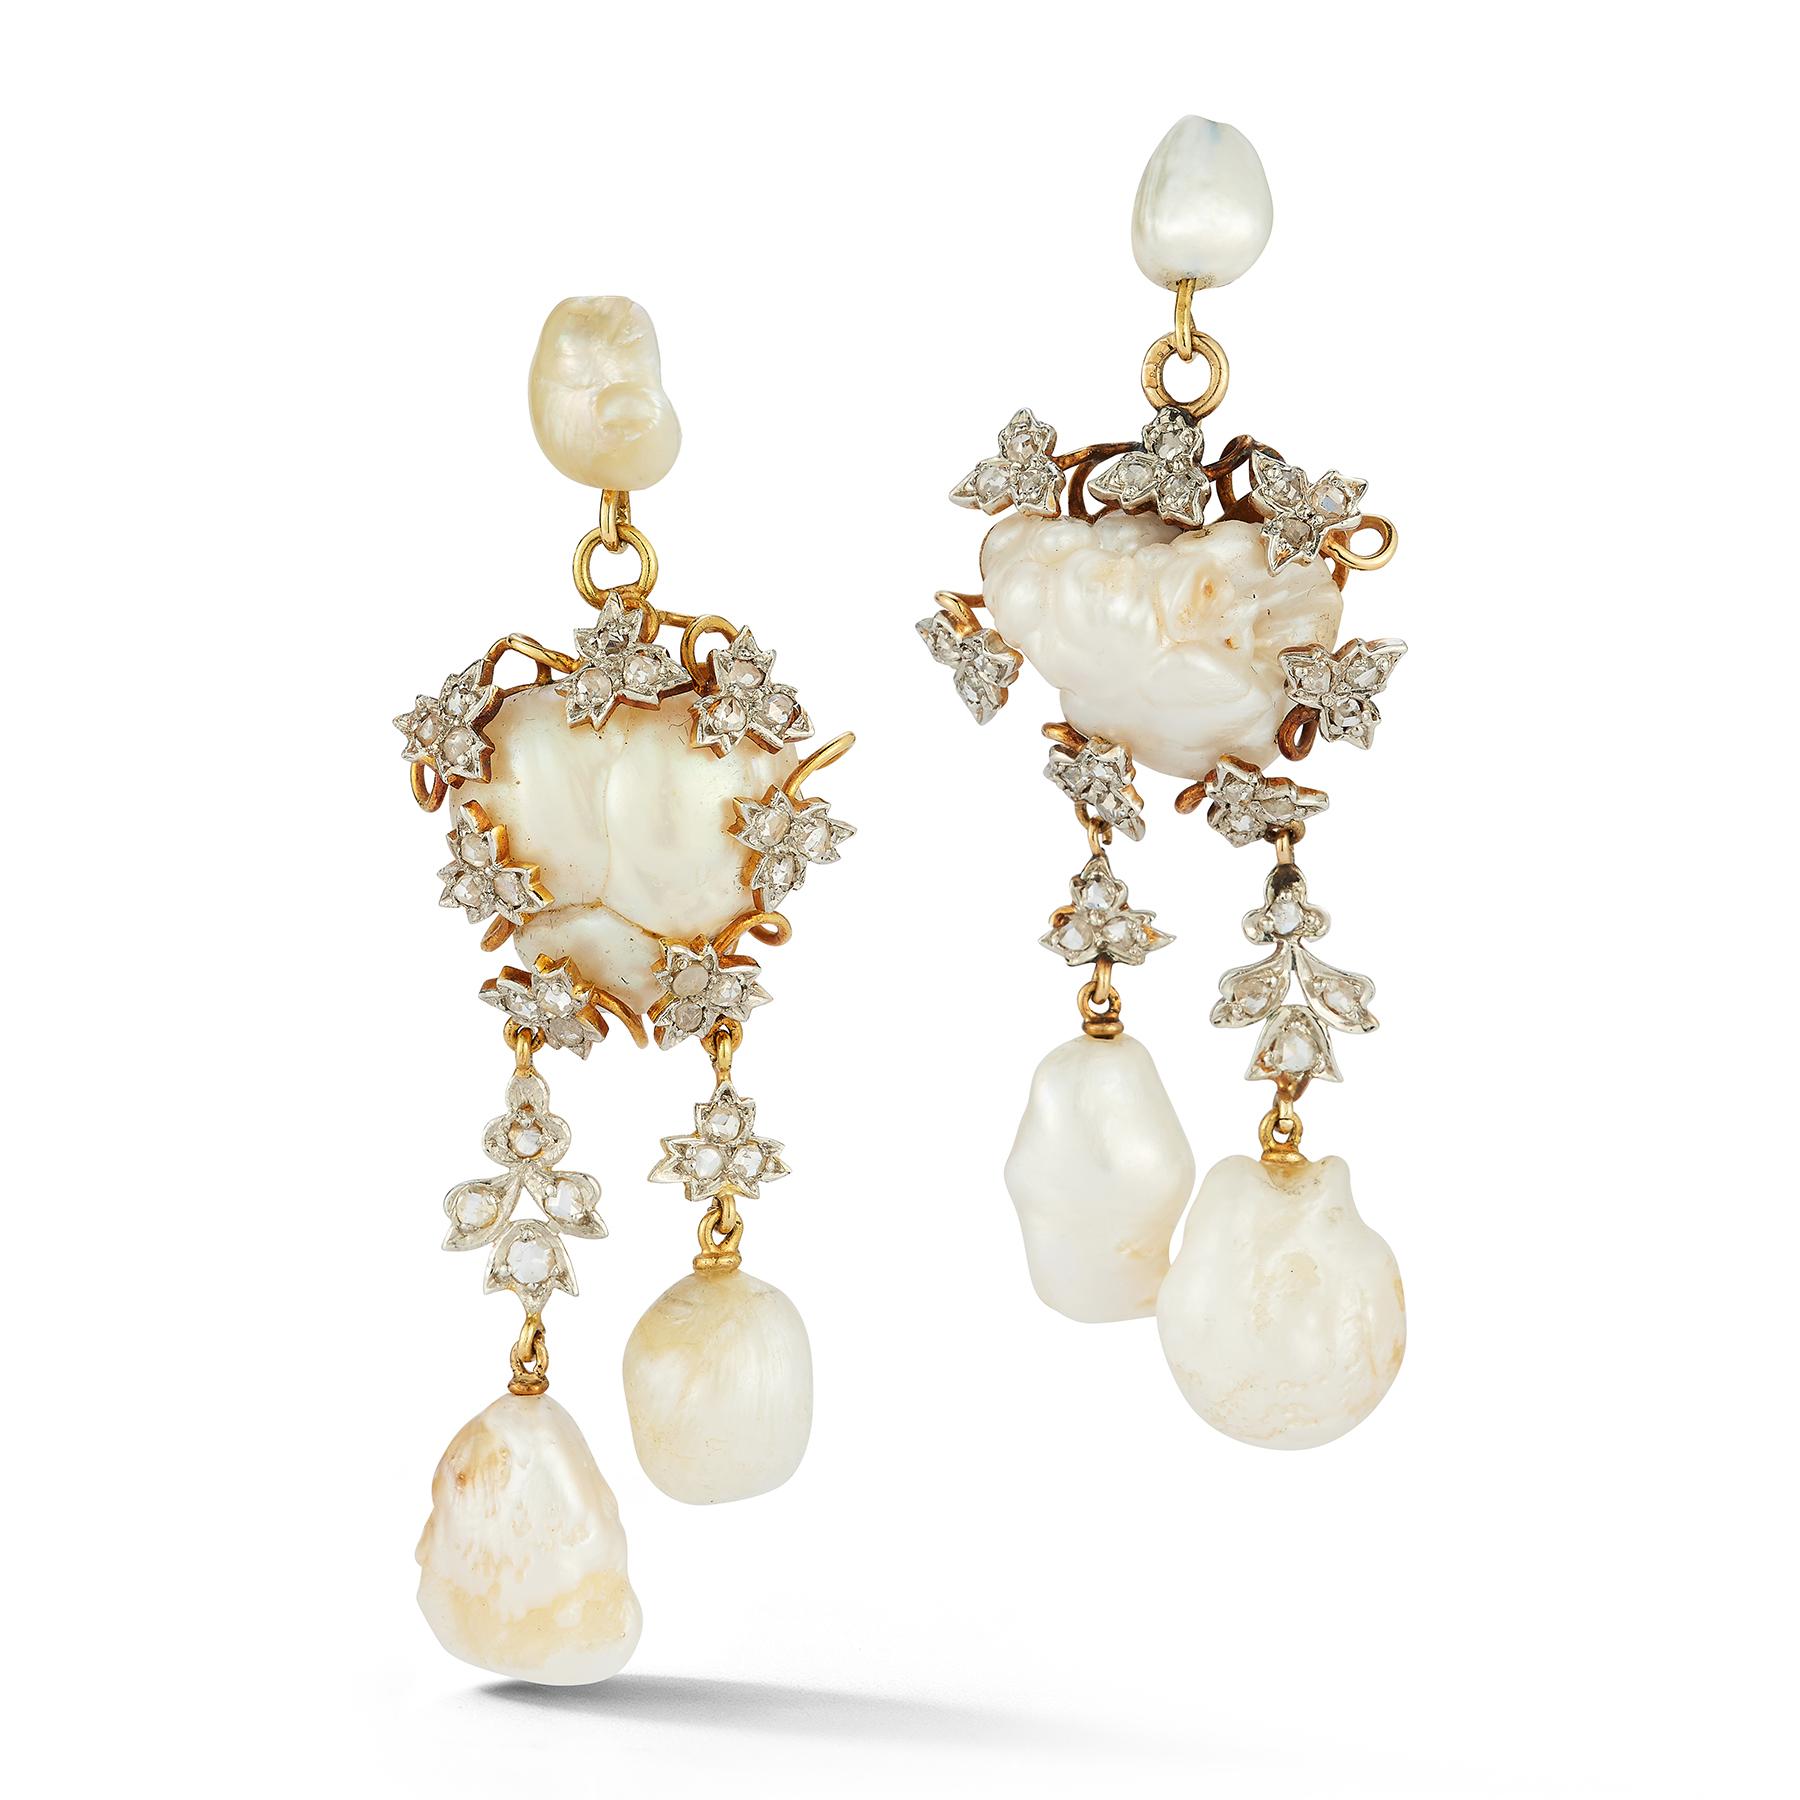 Antique Baroque Pearl And Diamond Earrings

A pair of two tone gold earrings set with 56 round cut diamonds and 8 pearls

Length: 2.38